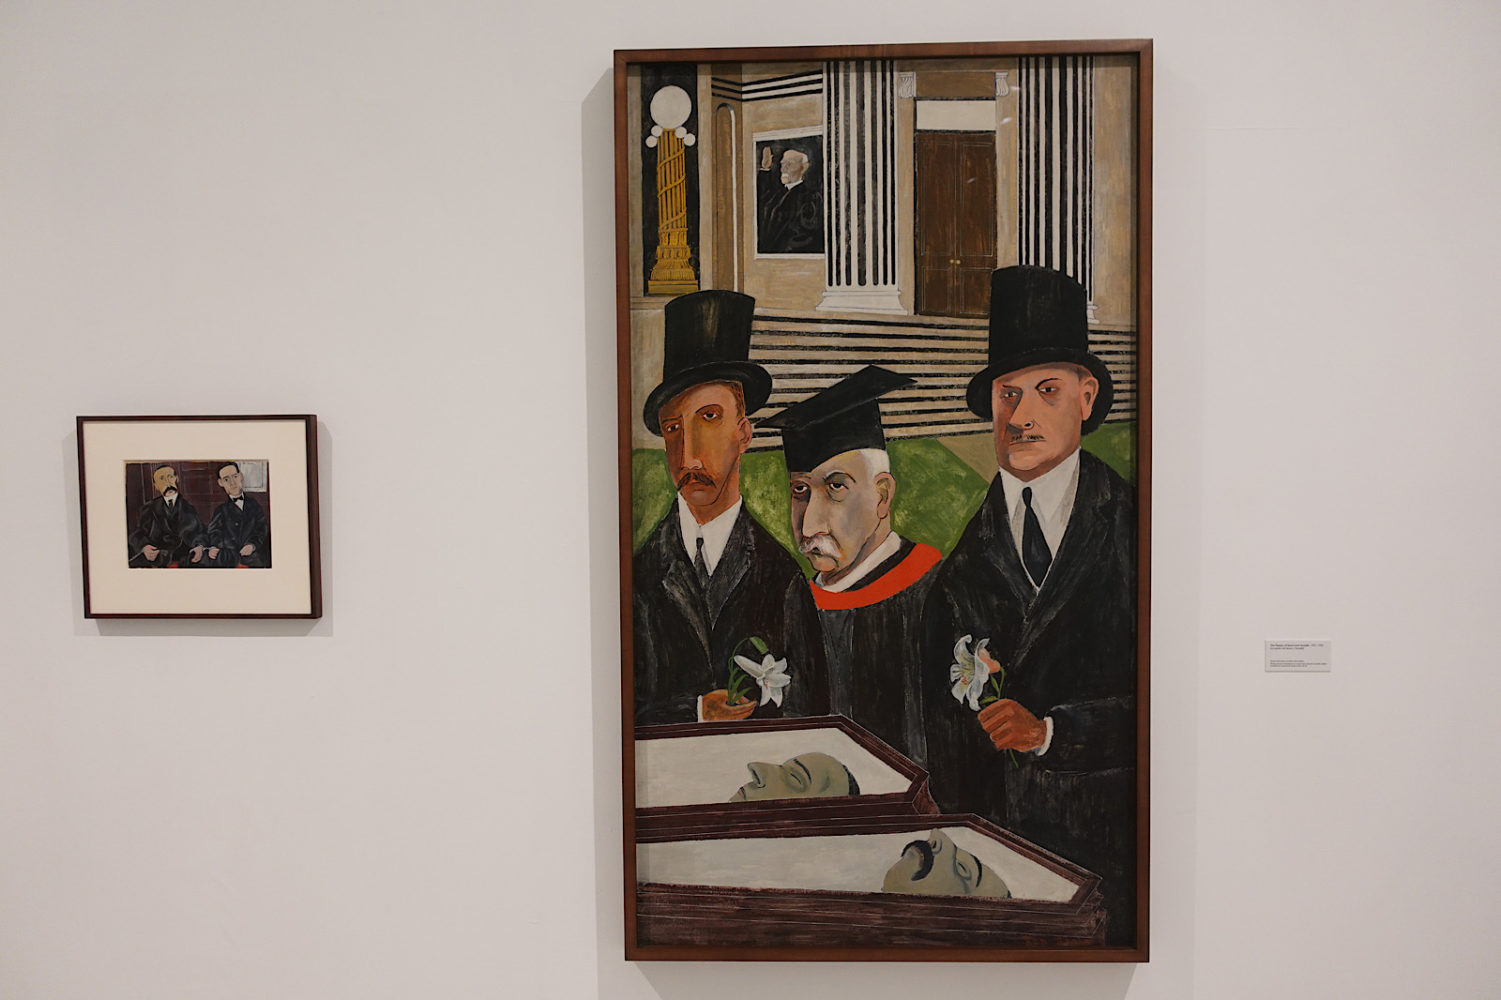 Ben Shahn’s “The Passion of Sacco and Vanzetti” 1931-32 at Museo de Reina Sofia in Madrid